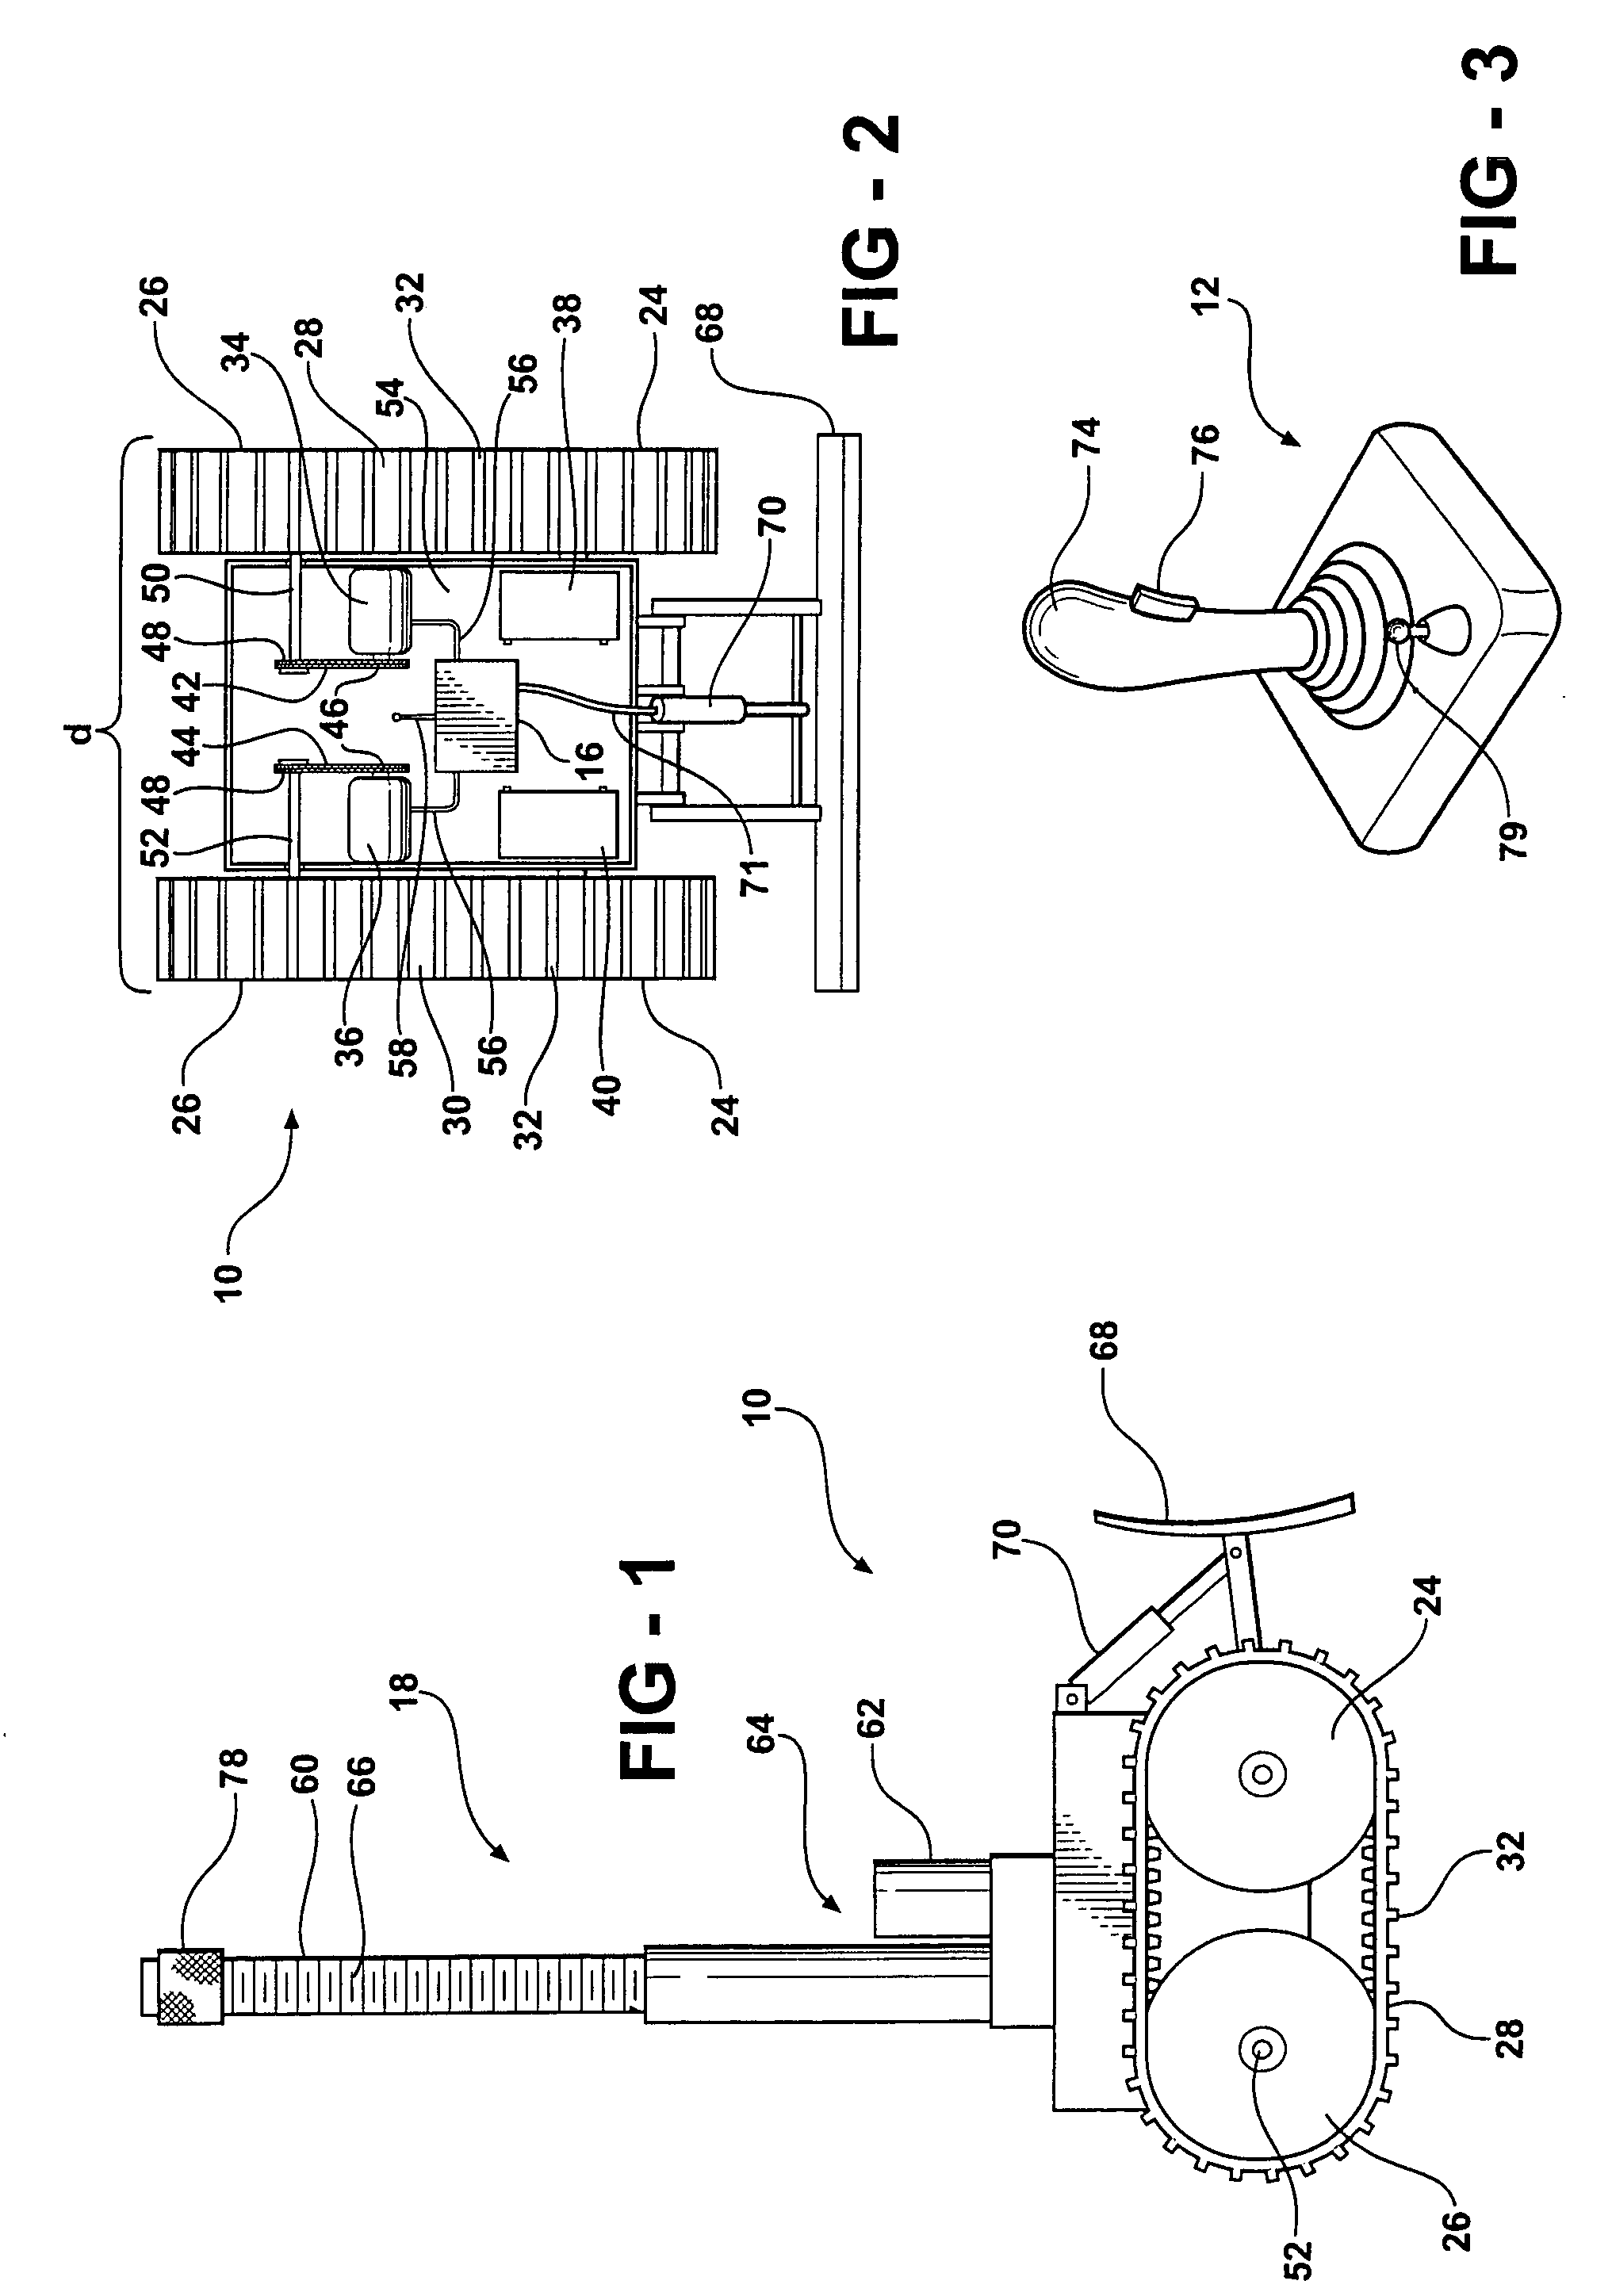 Method and apparatus for excavating earth to a desired depth